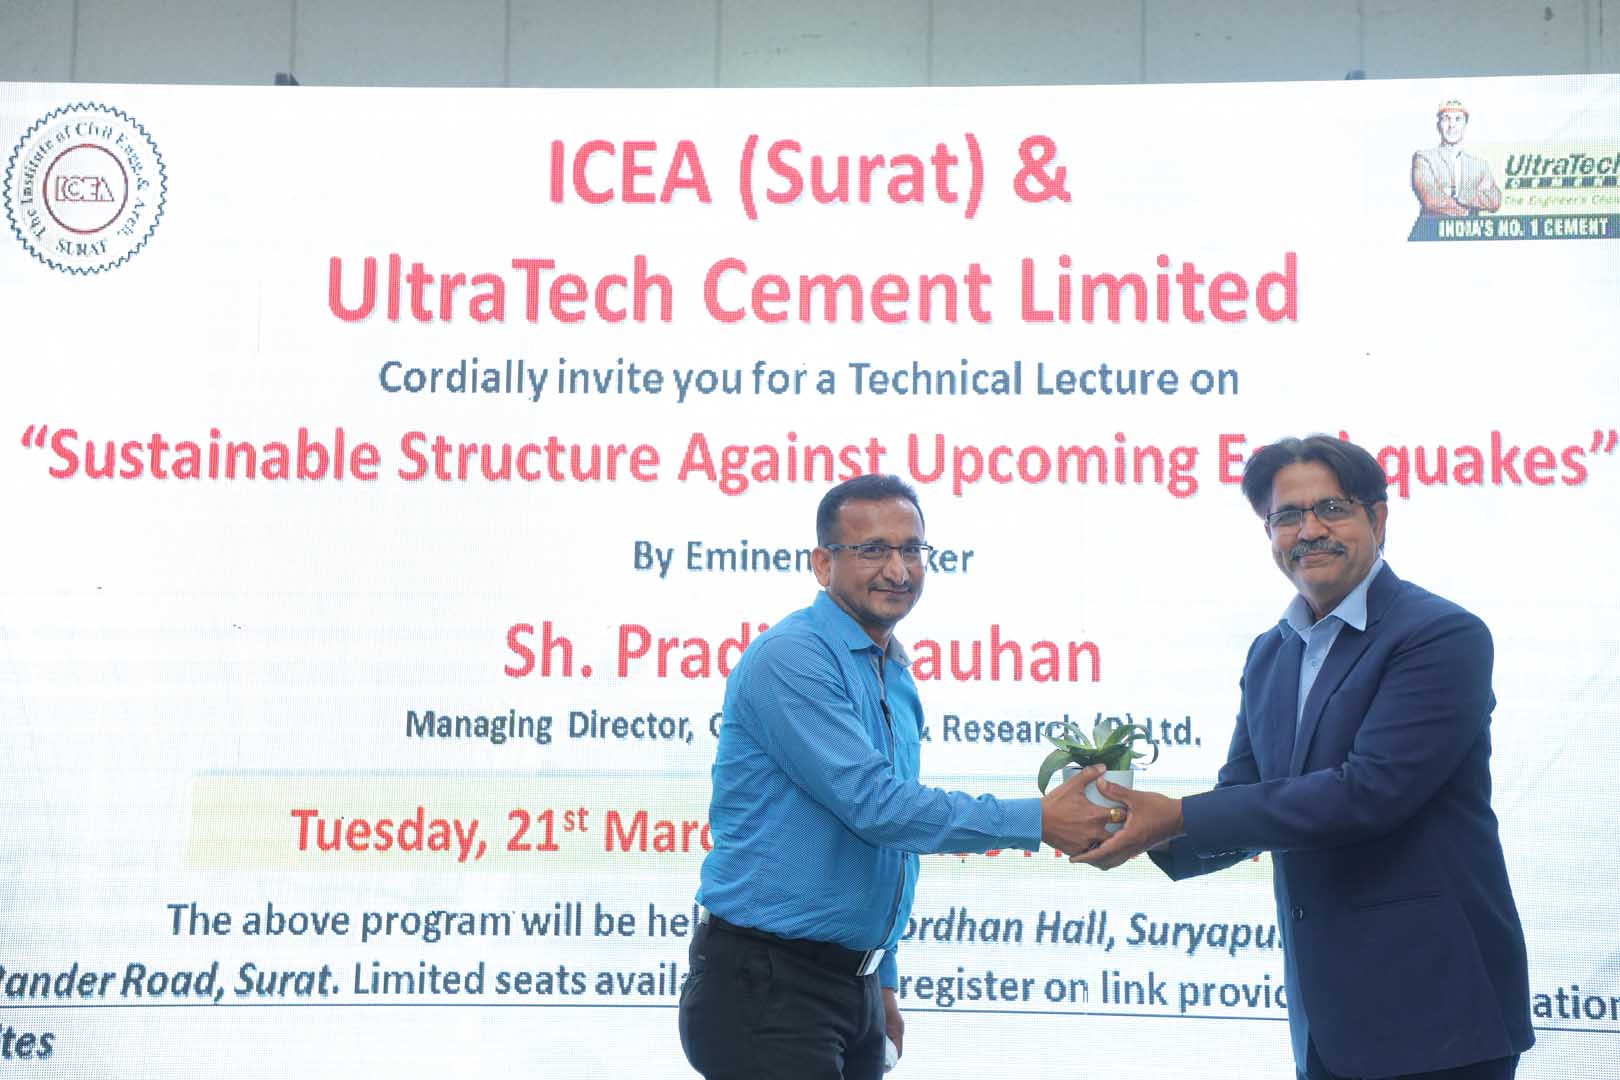 Technical Seminar on Sustainable Structure Against Upcoming Earthquakes